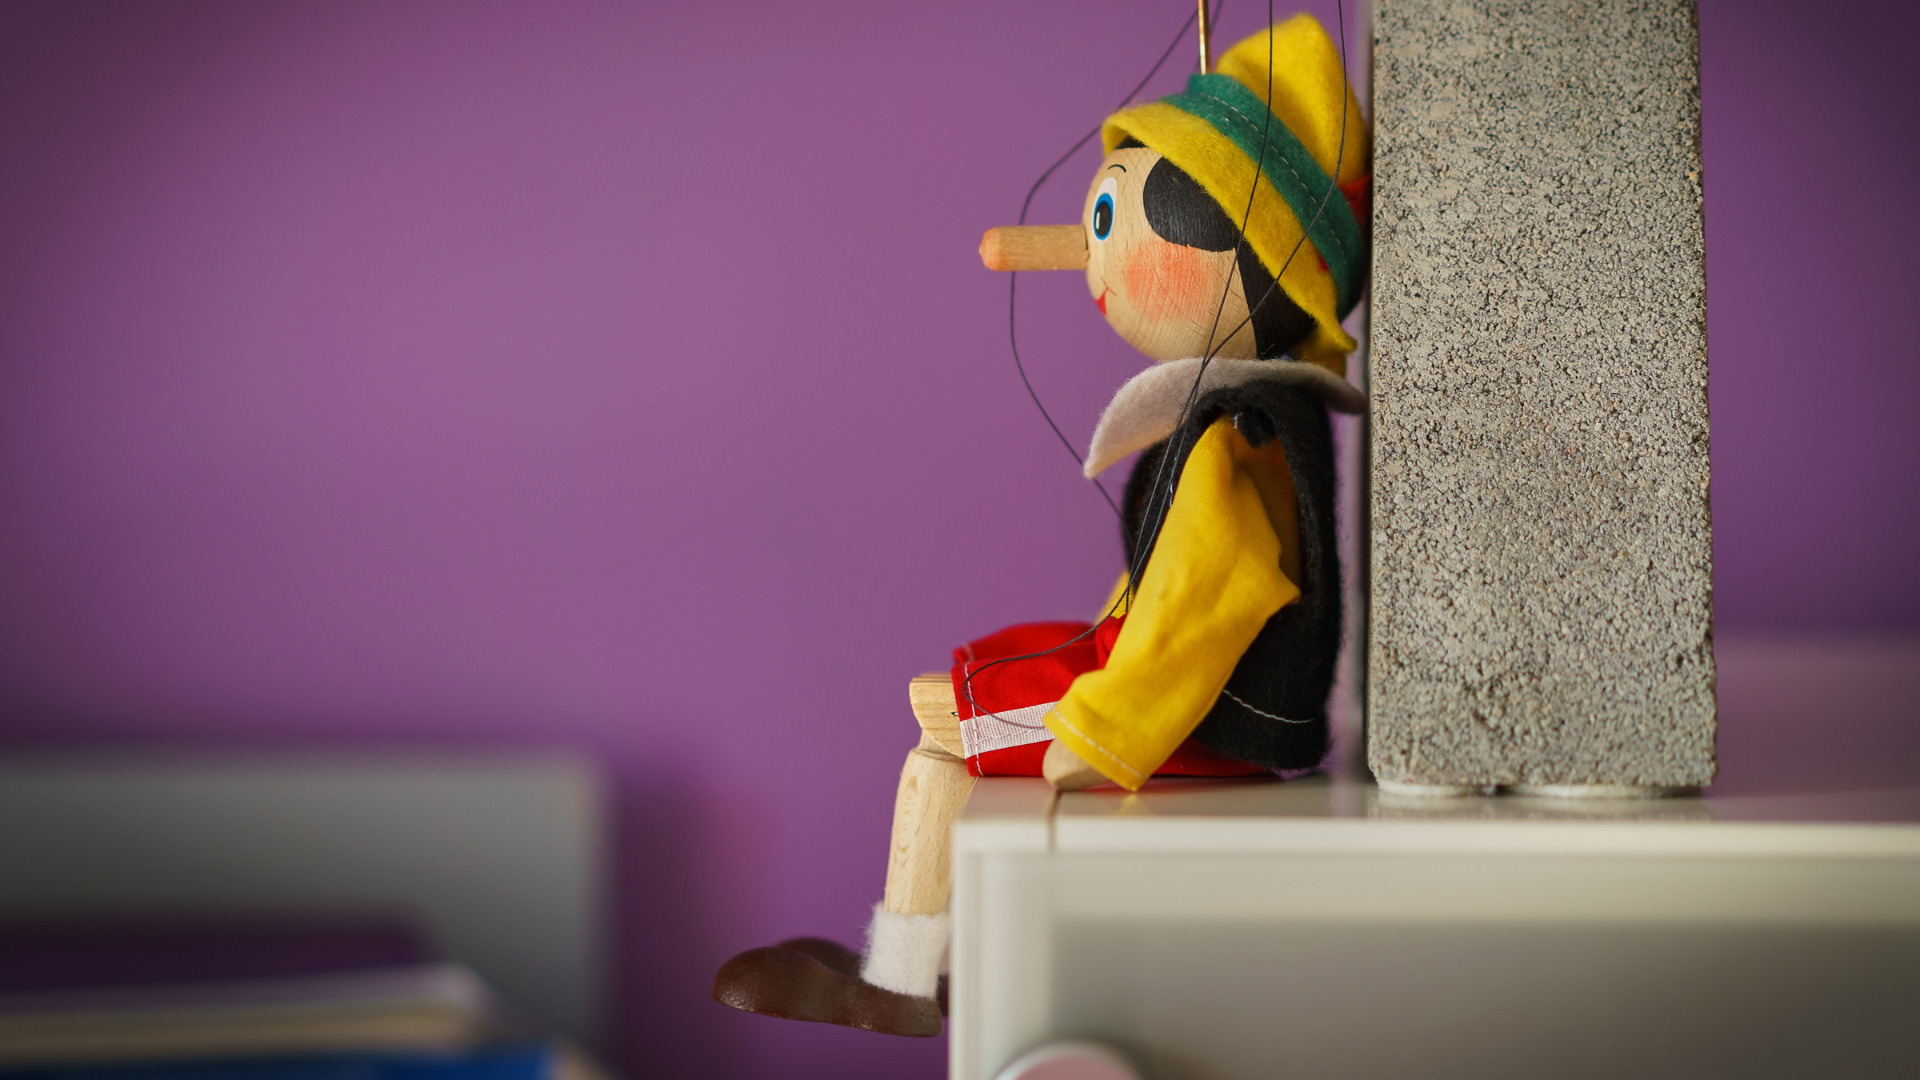 pinocchio toy sitting on a ledge and leaning with back on a wall